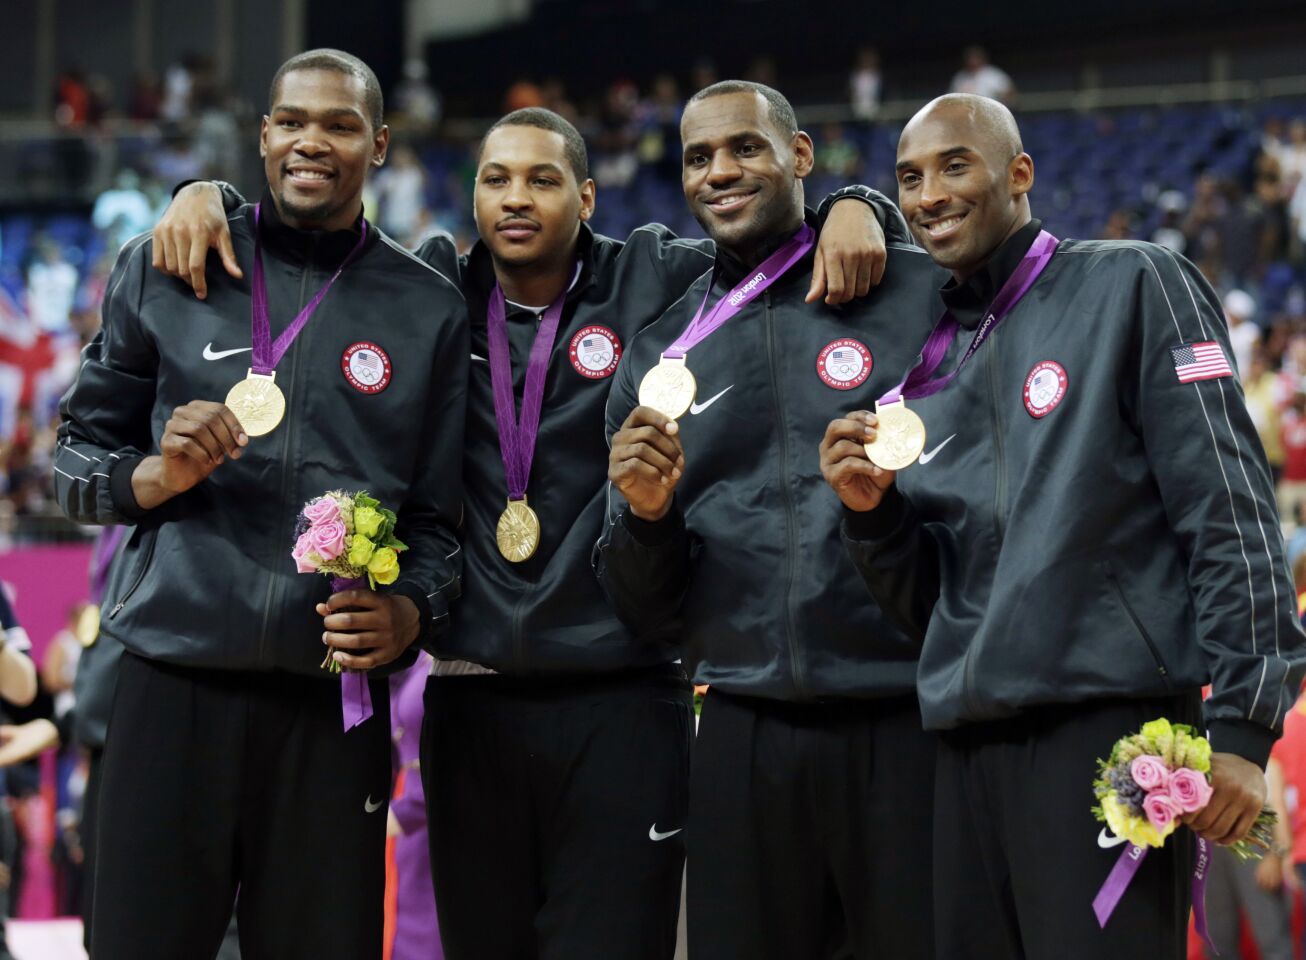 Team USA players, from left, Kevin Durant, Carmelo Anthony, LeBron James and Kobe Bryant with their gold medals at the 2012 Olympics.